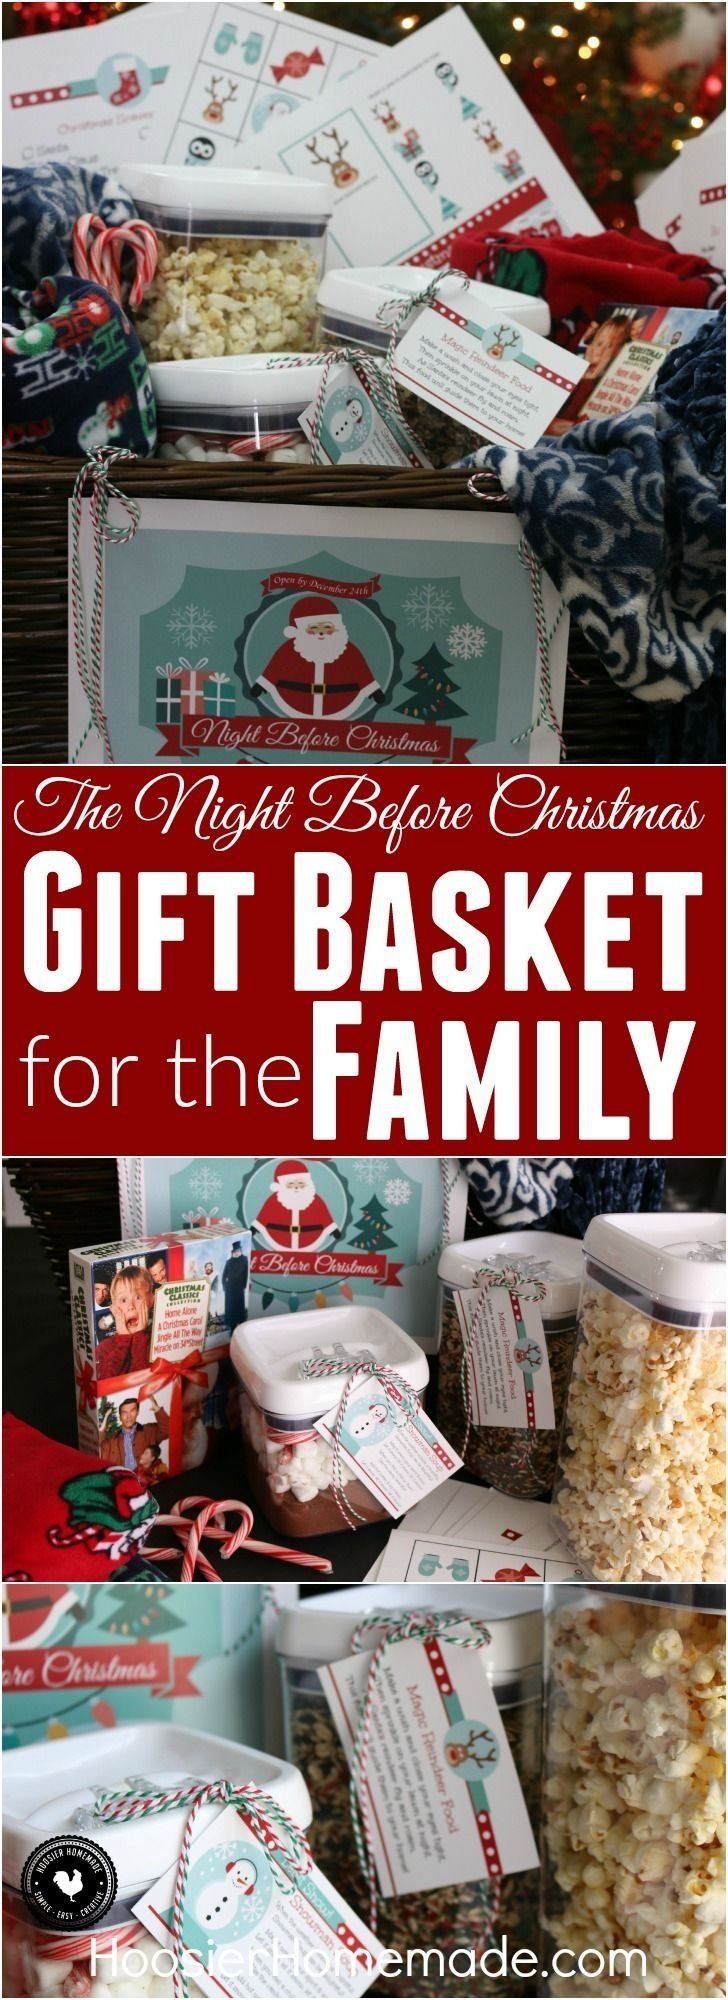 10 Lovable Gift Ideas For The Whole Family 930 best a tisket a basket images on pinterest gift basket ideas 1 2022